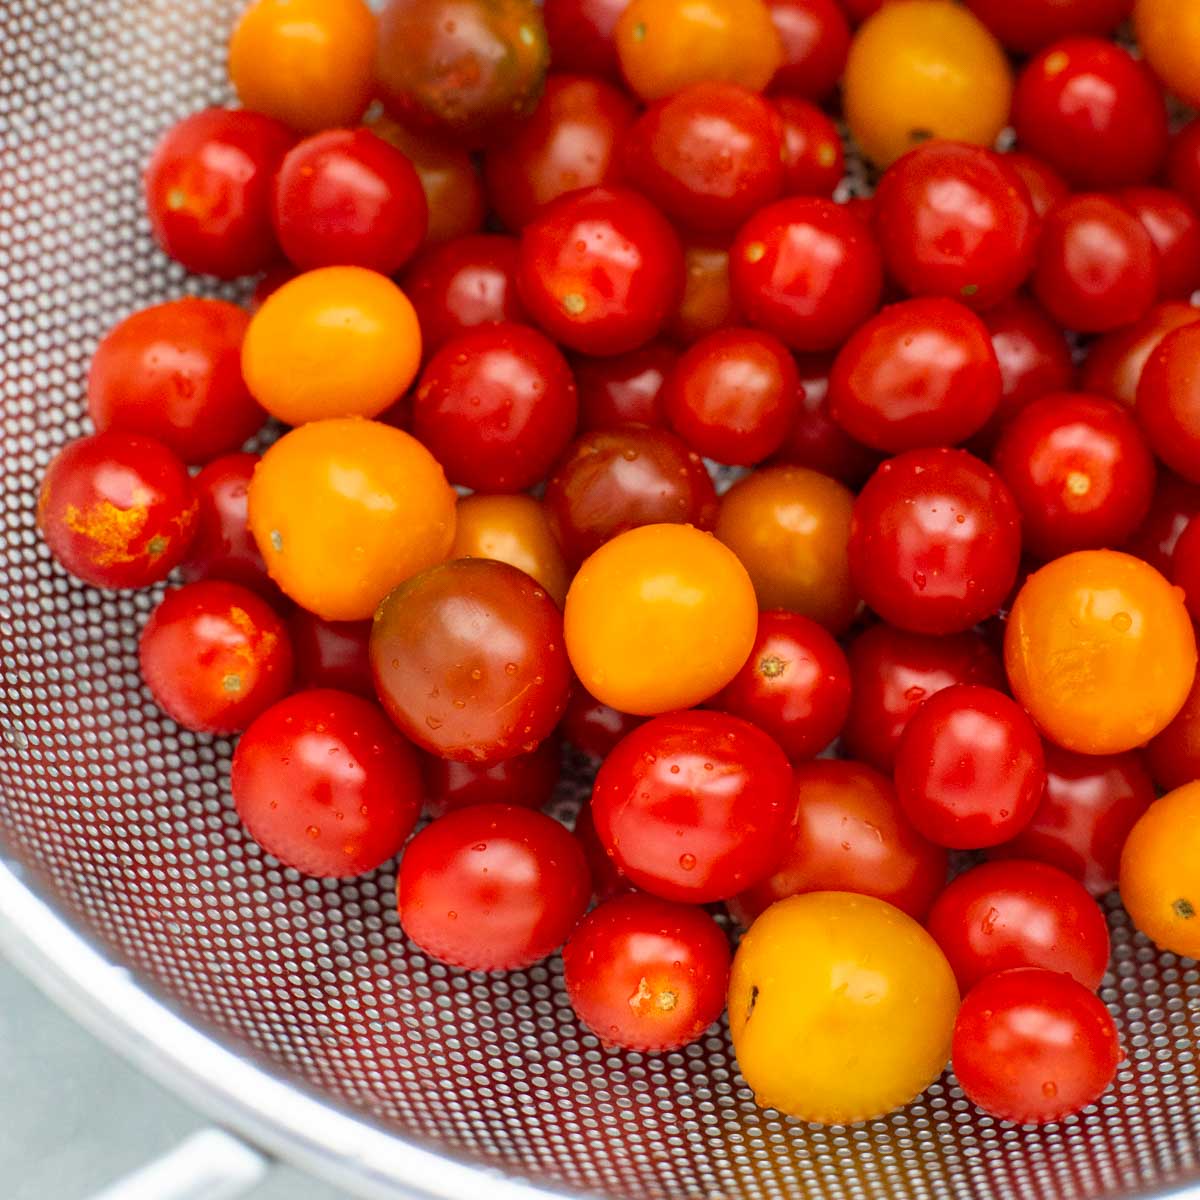 A strainer is filled with raw cherry tomatoes in shades of yellow and red.